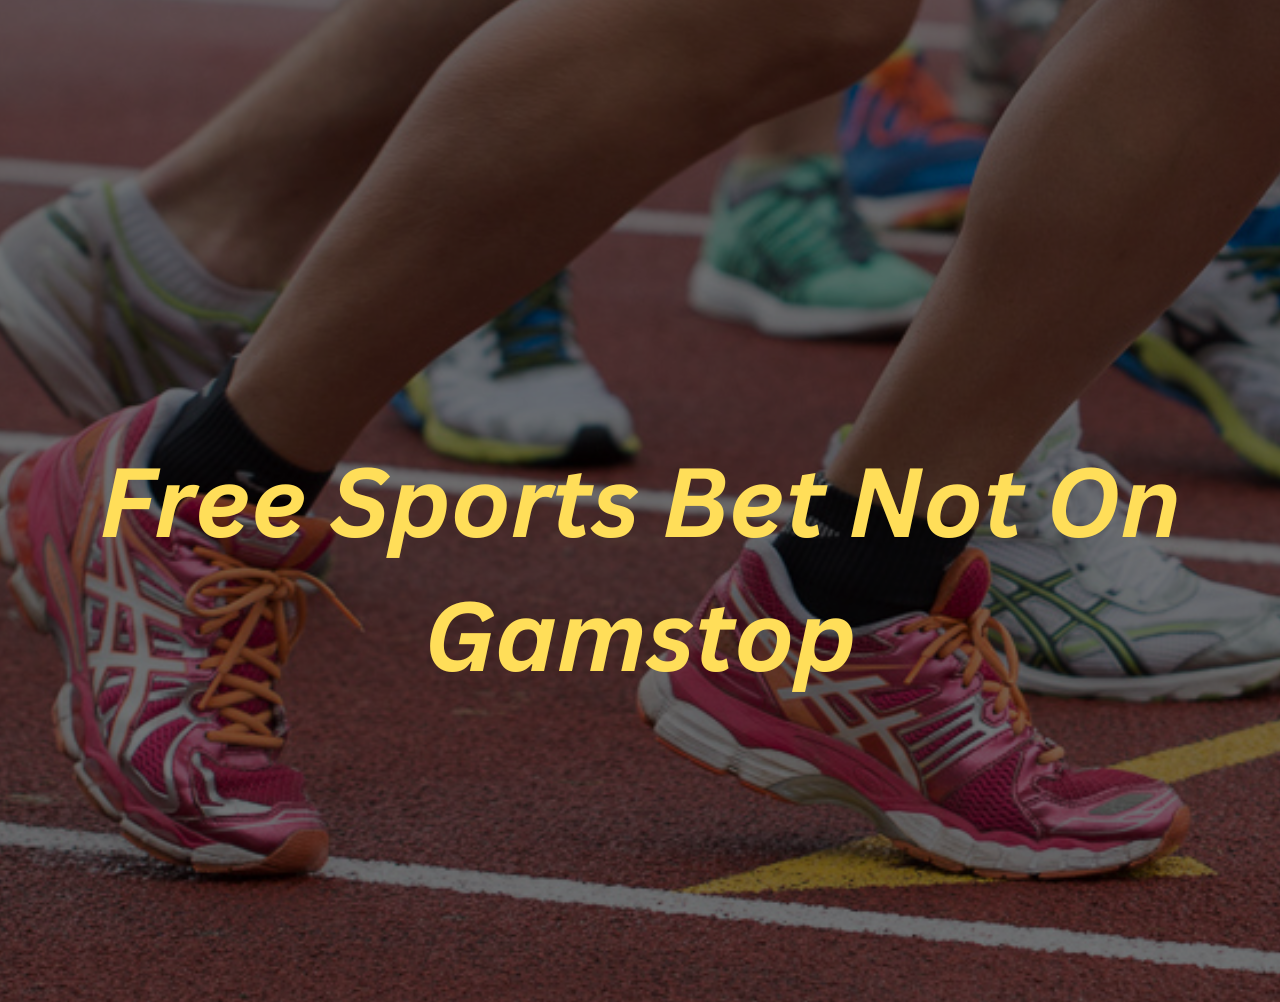 Free Sports Bet Not On Gamstop